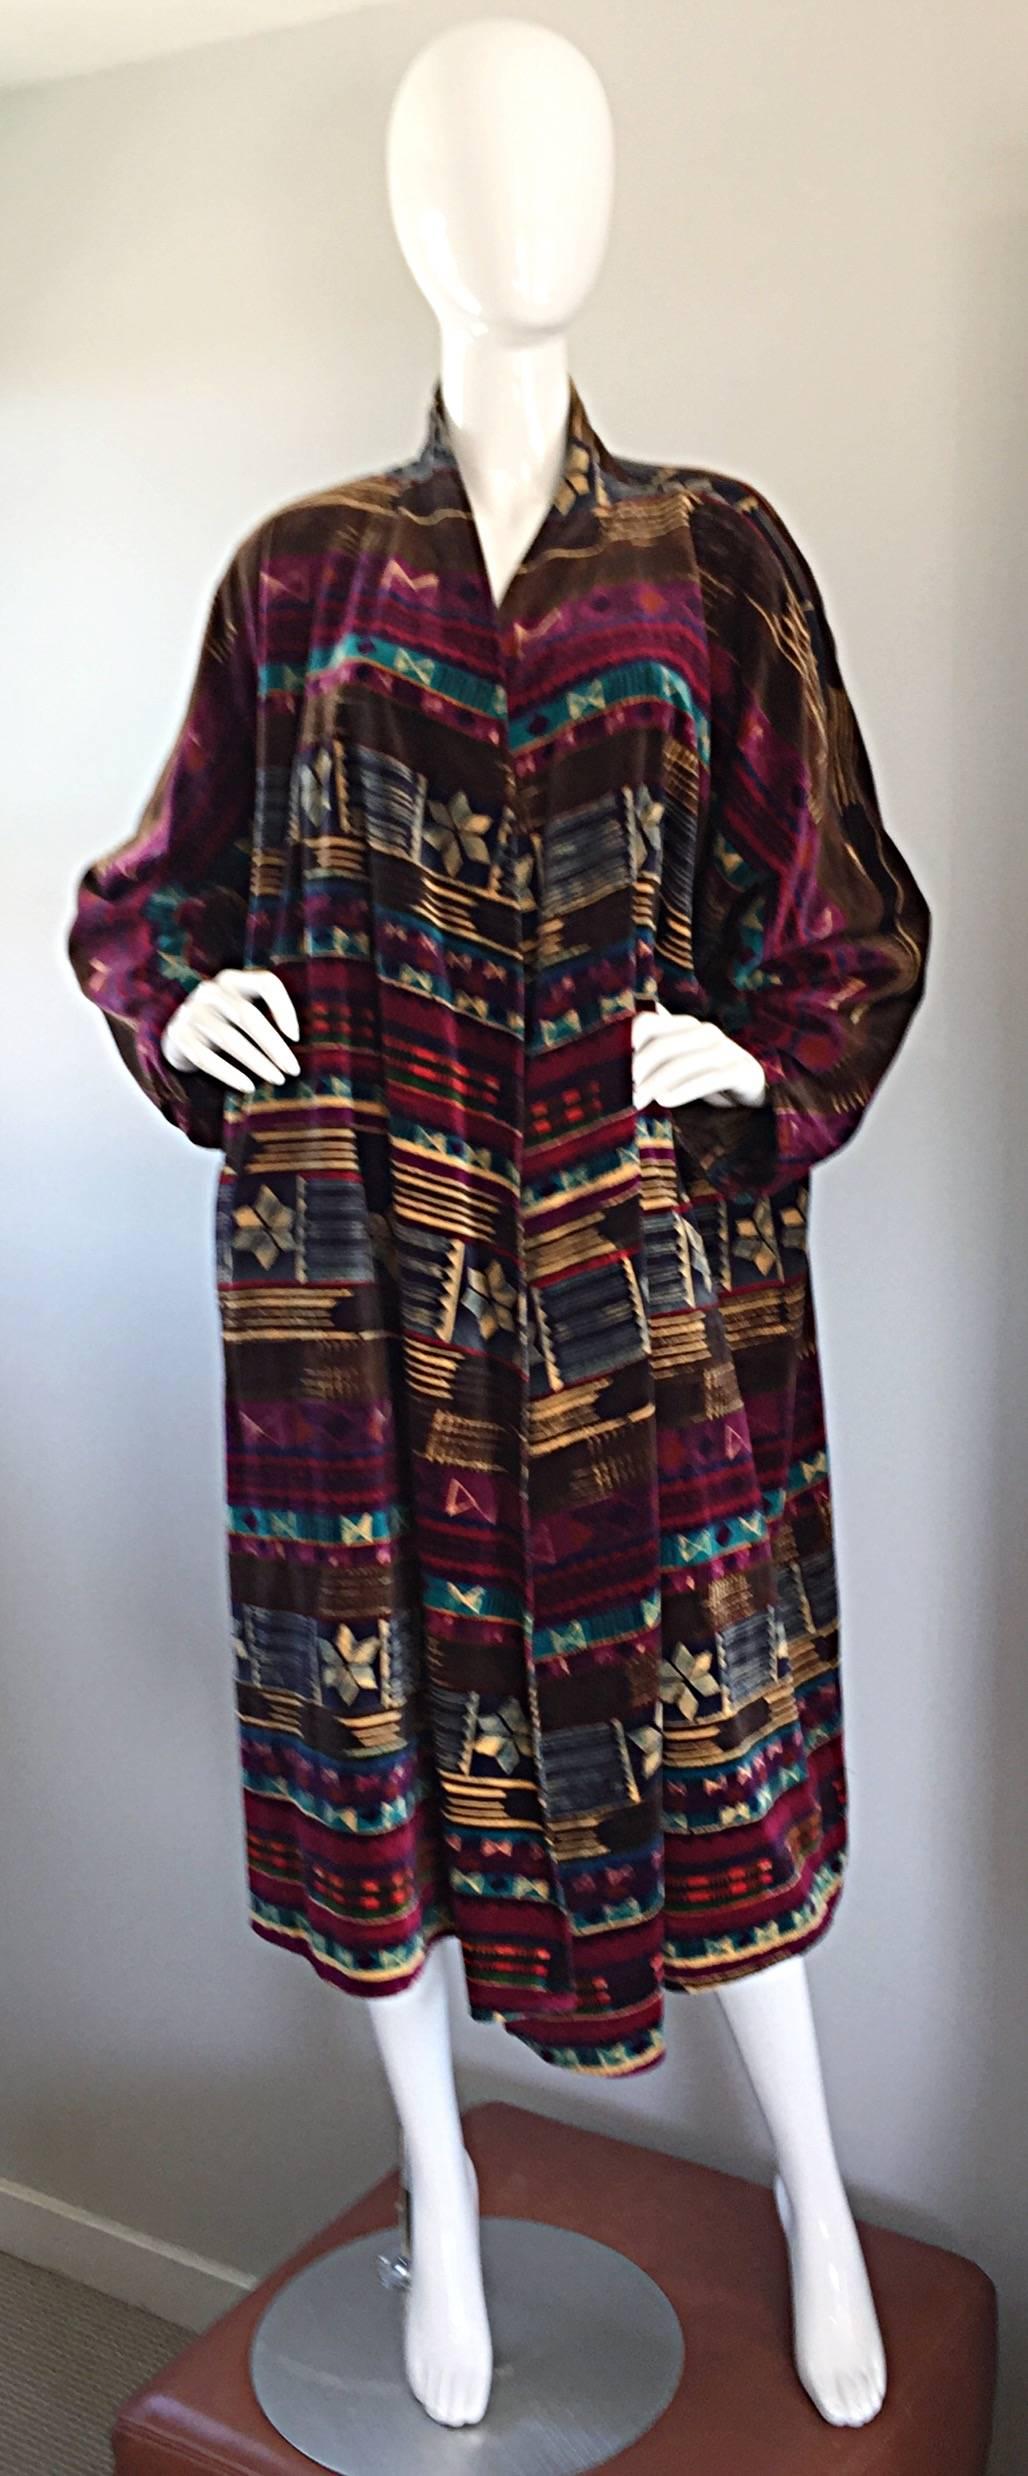 Exceptional vintage ESCADA, by MARGARETHA LEY, tribal print velvet opera jacket / evening coat! Vibrant ethnic print, with colors mixed incredibly well--Teal blue, burgundy wine, brown, ivory, and blue. Couture quality workmanship, with a heavy eye